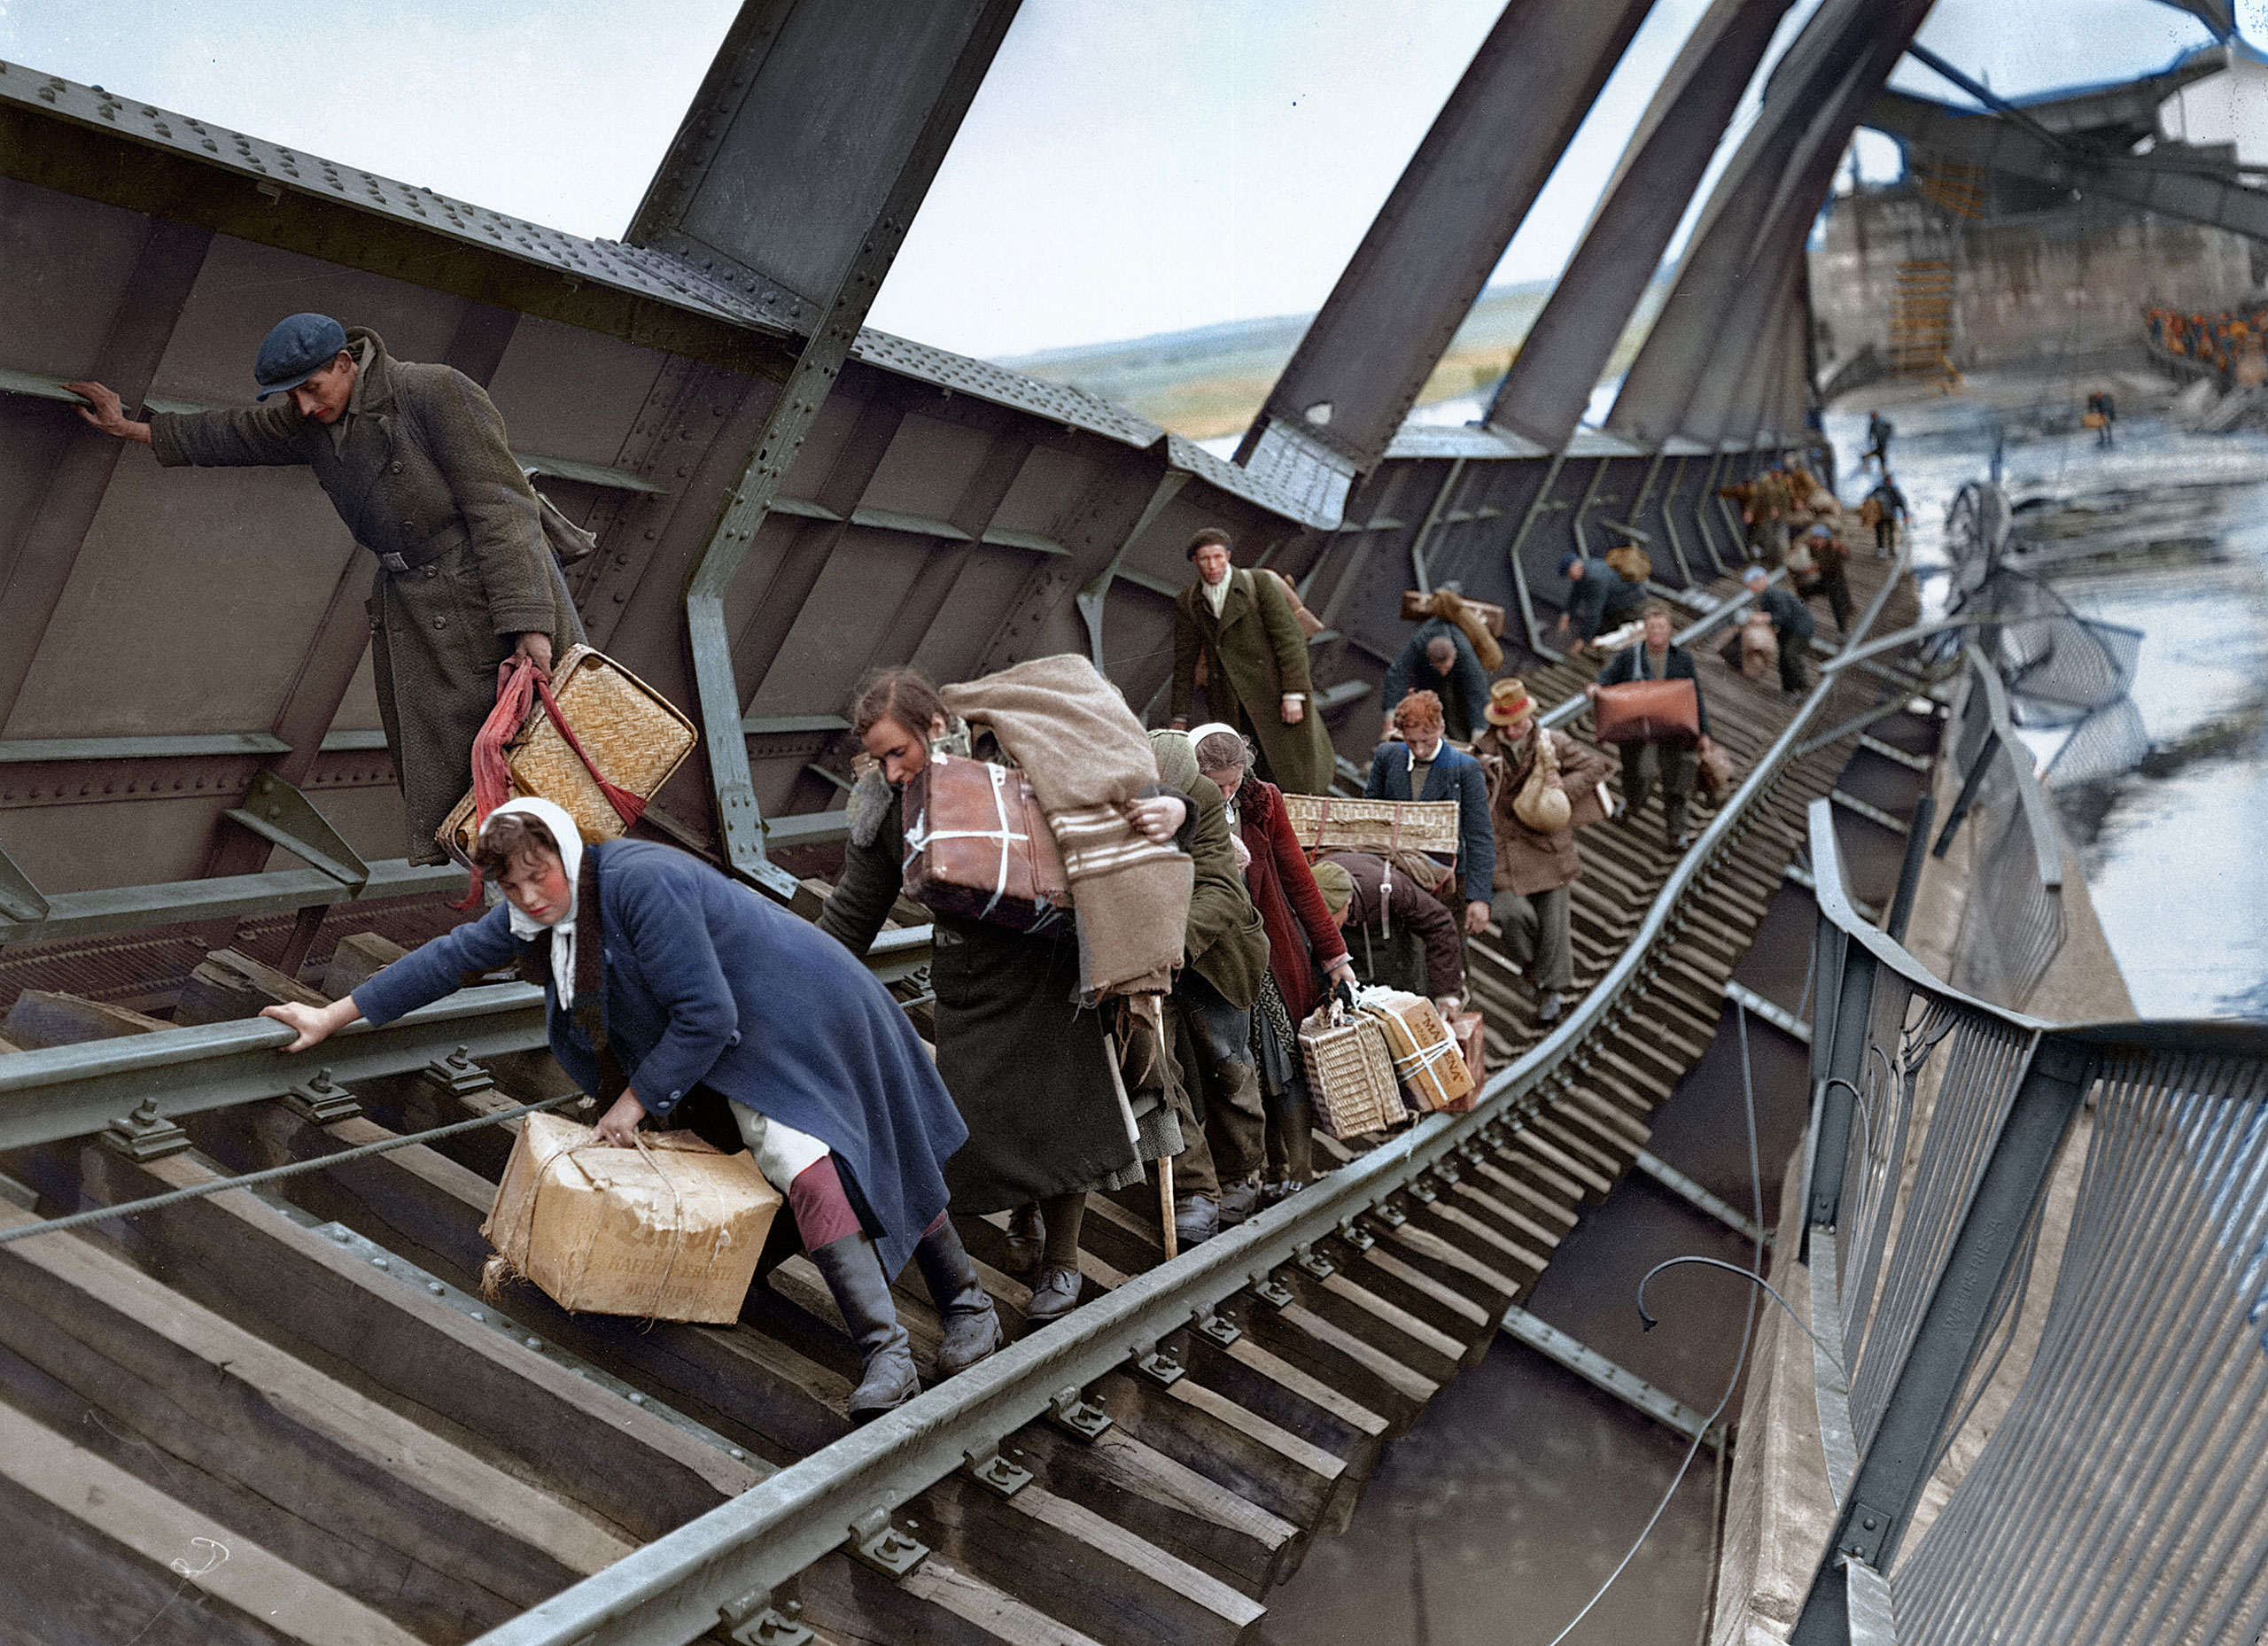 Displaced persons cross a bridge on the River Elbe at Tangermunde, which was blown up by the Germans, to escape the chaos behind German lines caused by the approach of the advancing Russians on May 1, 1945.